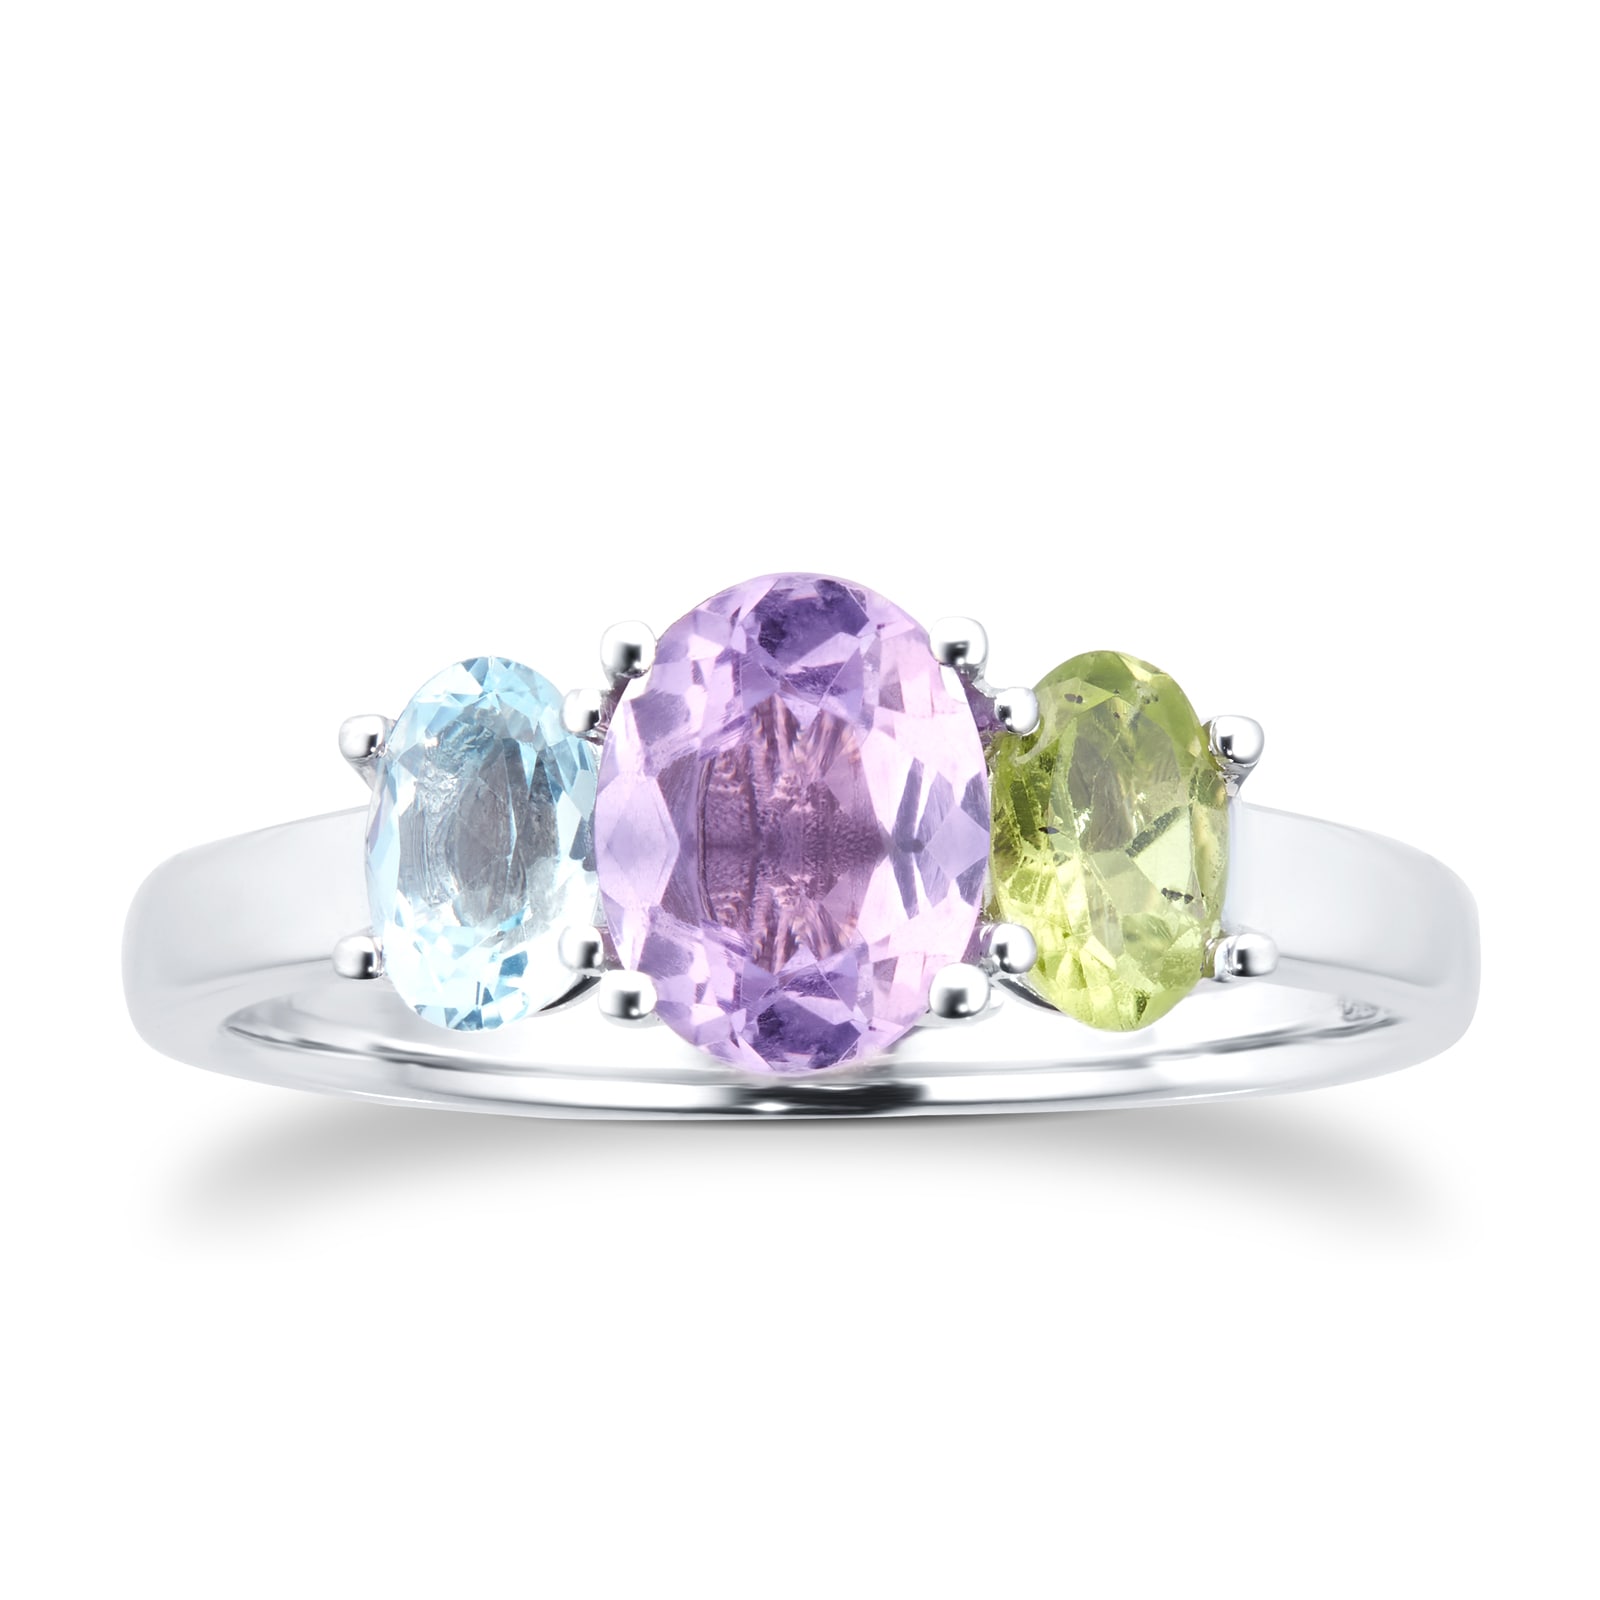 9ct White Gold 3 Stone Peridot, Amethyst and Topaz Ring - Ring Size G.5